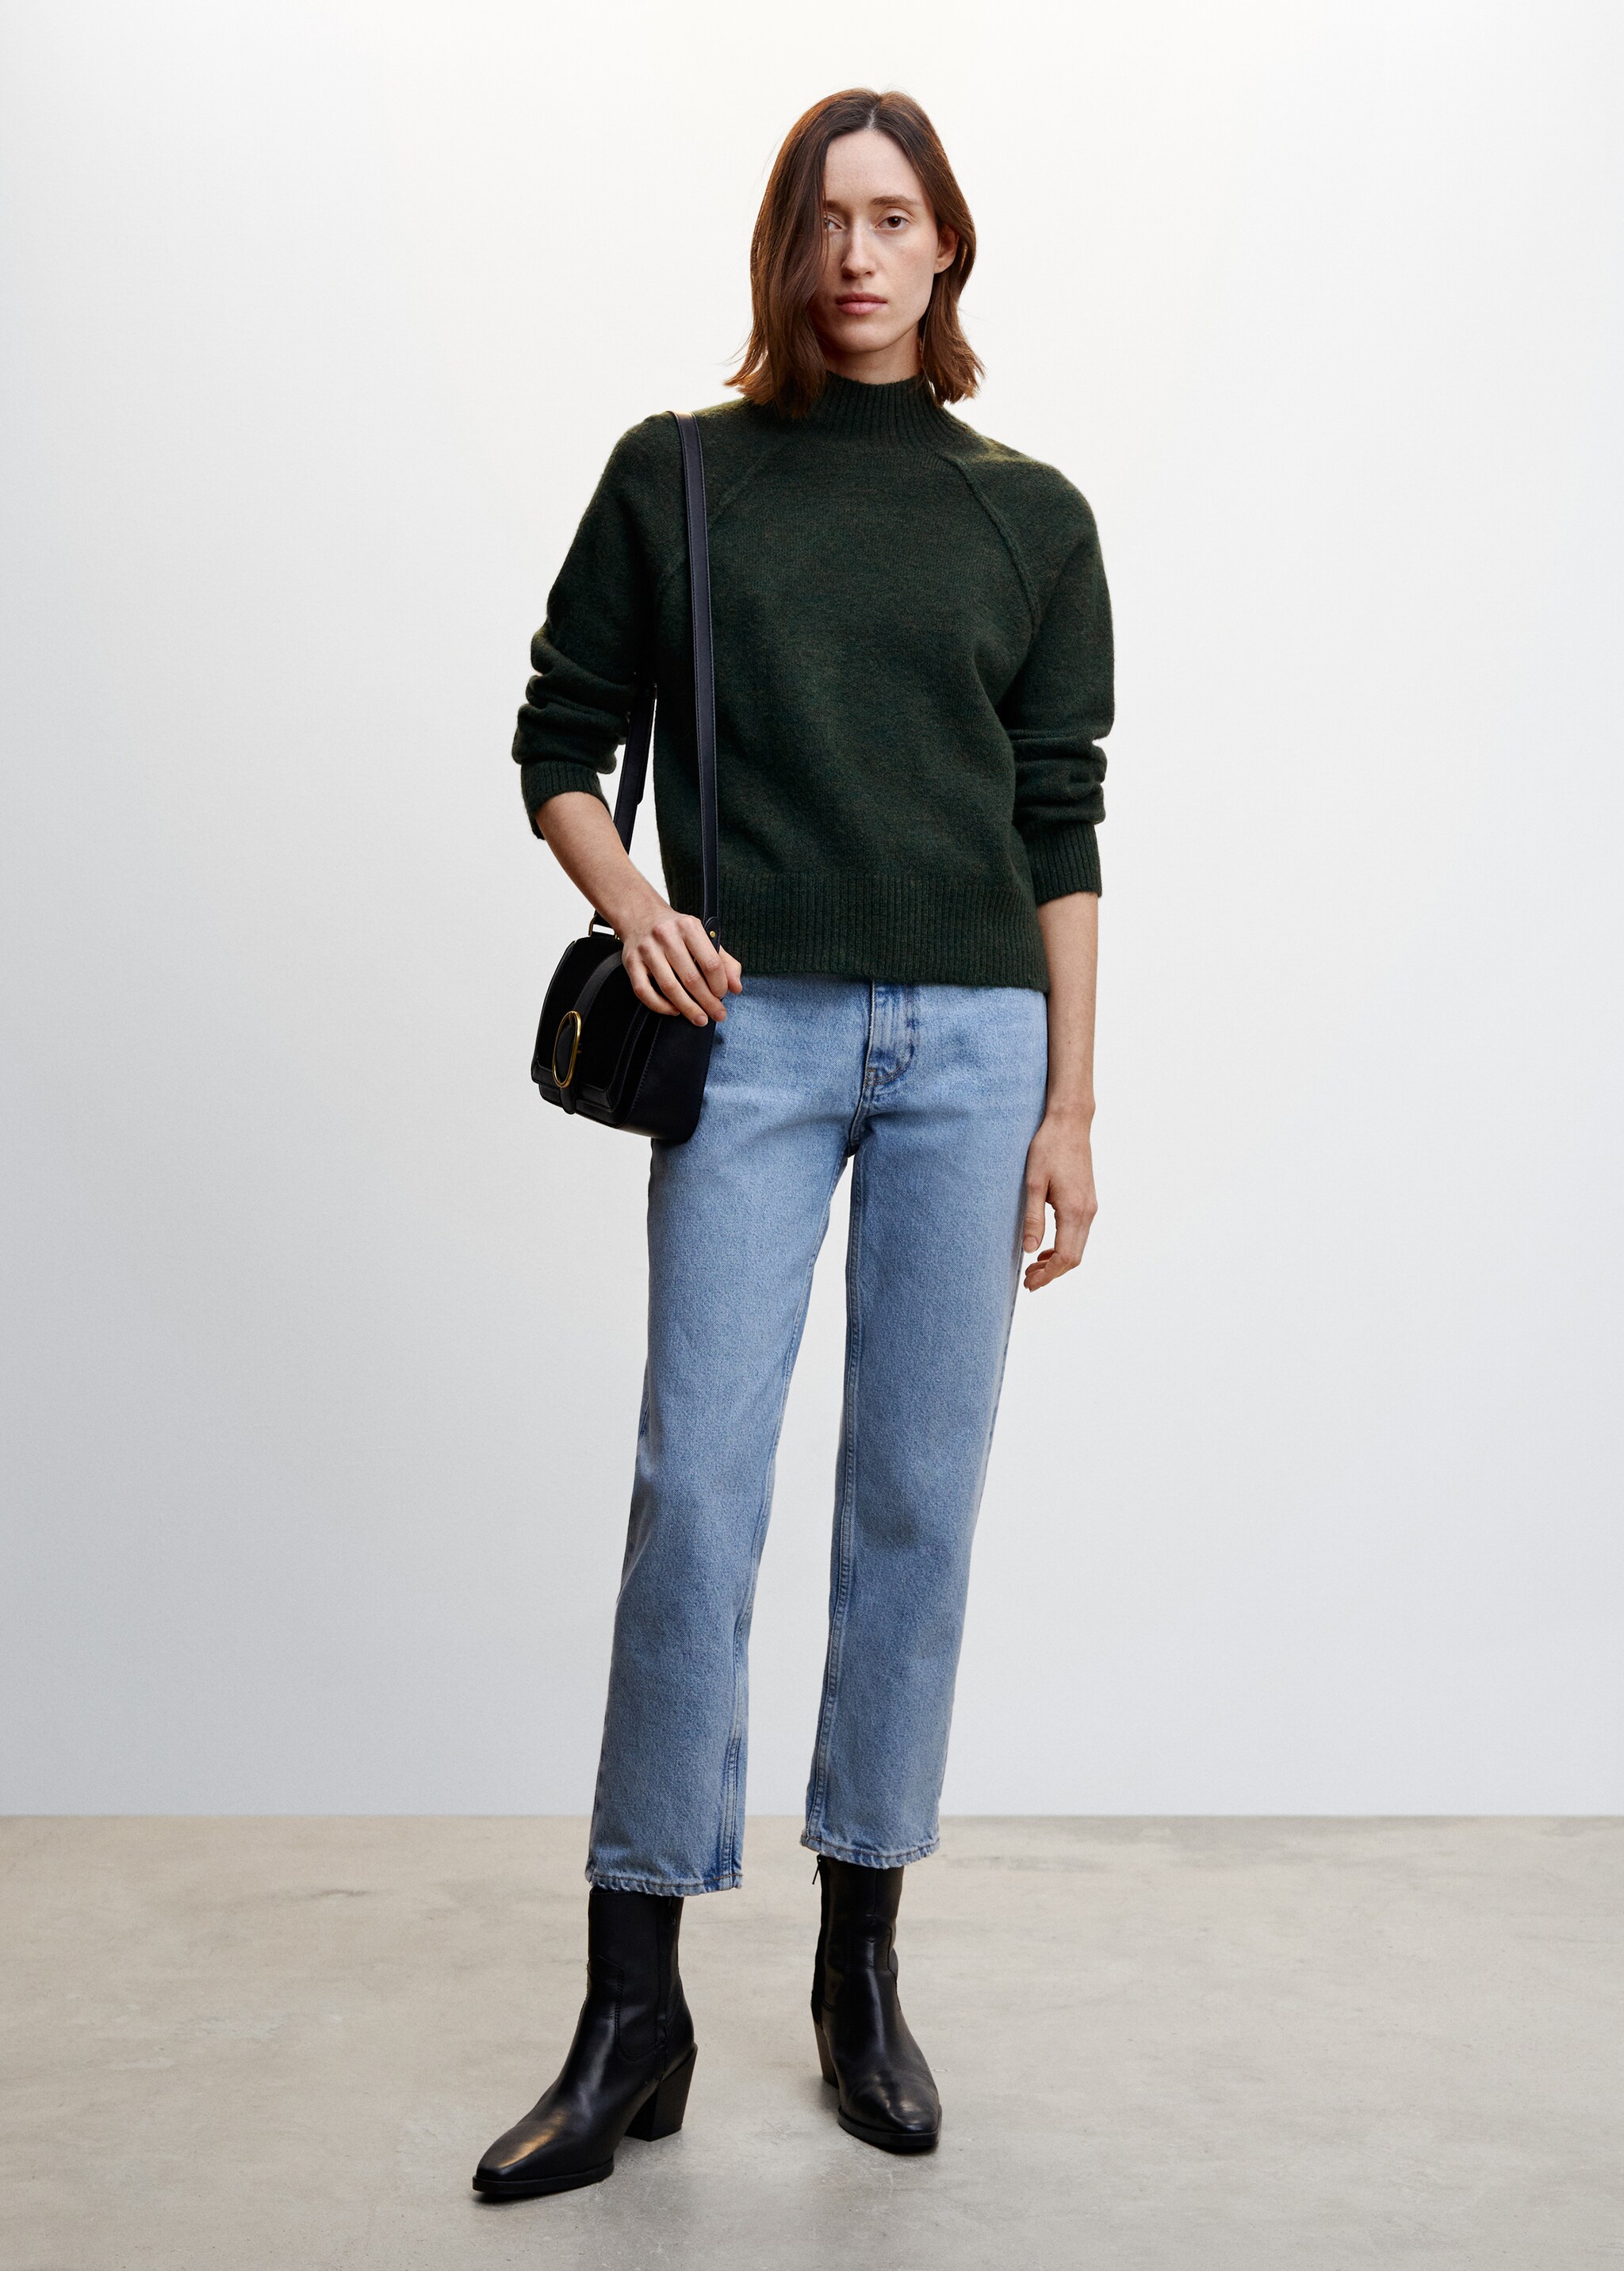 Turtleneck sweater with seams - General plane